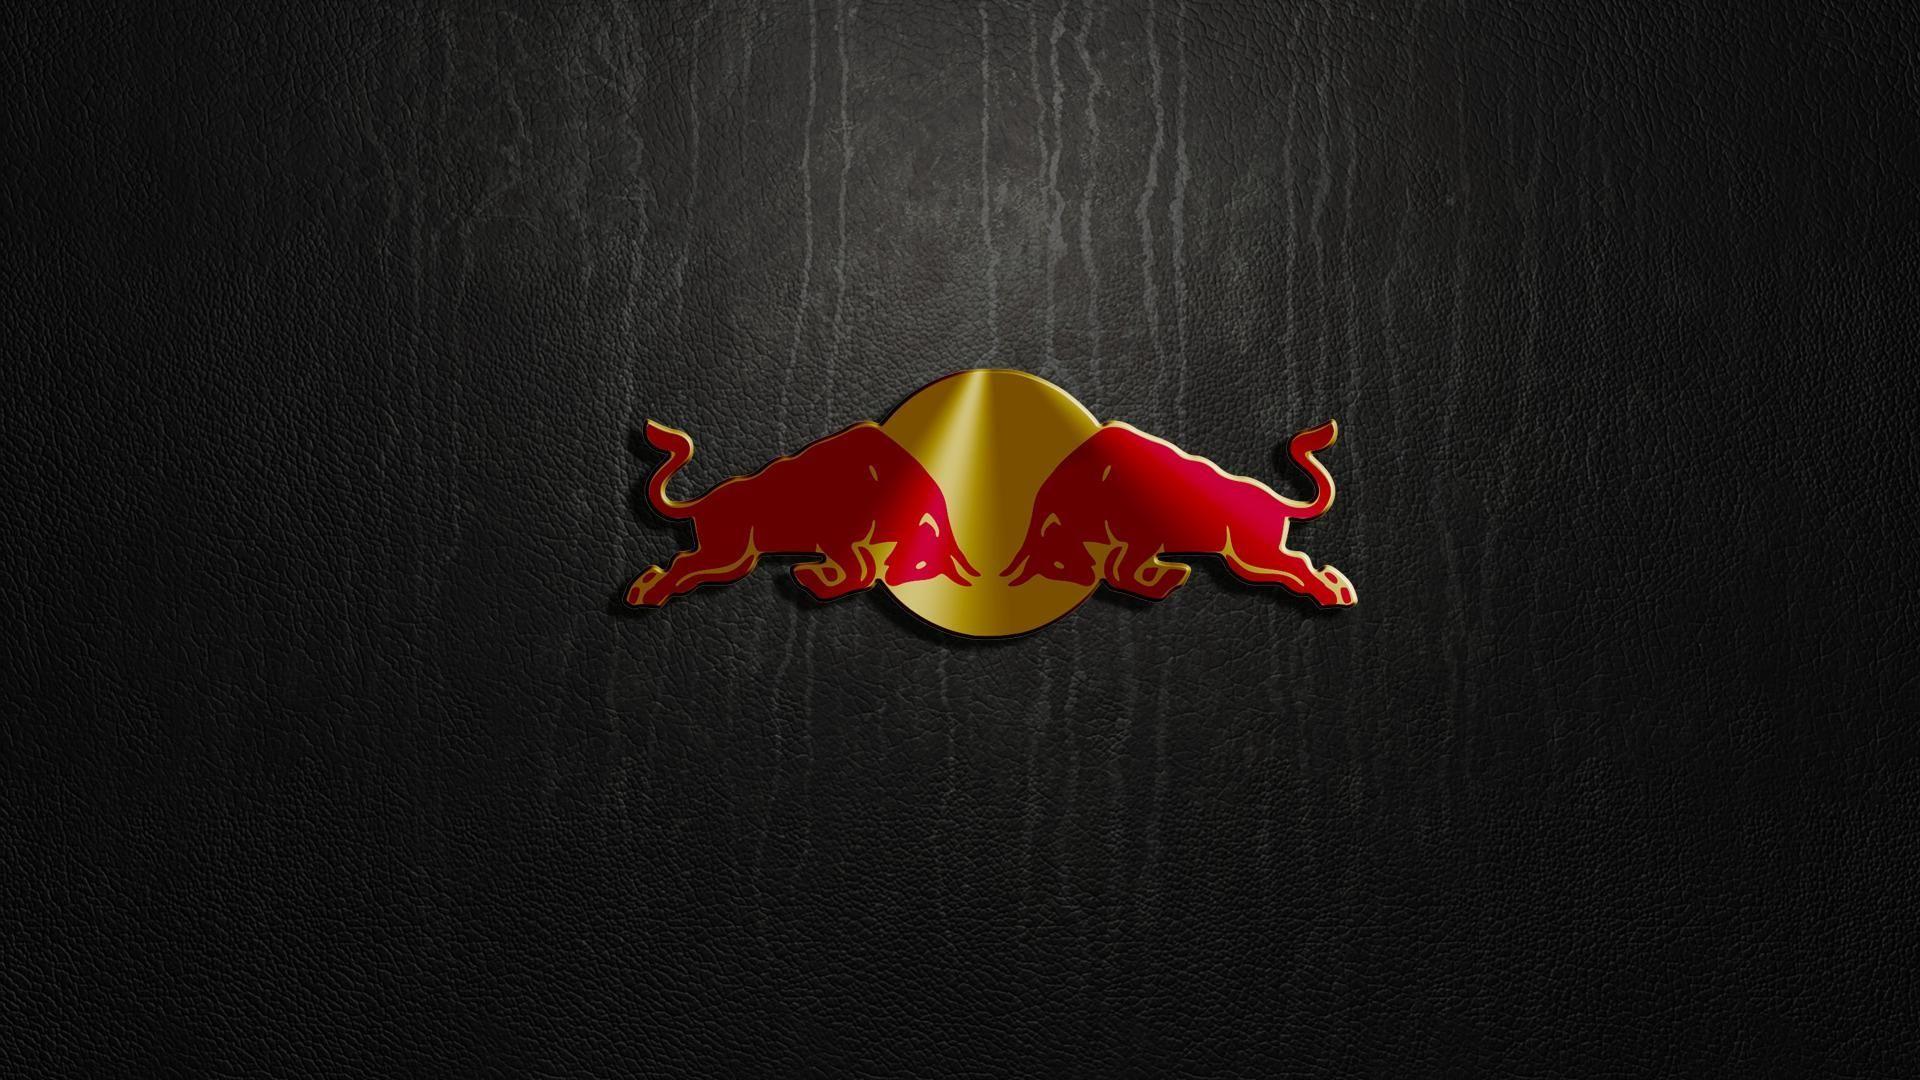 4K Red Bull Wallpapers - Top Free 4K Red Bull Backgrounds - WallpaperAccess